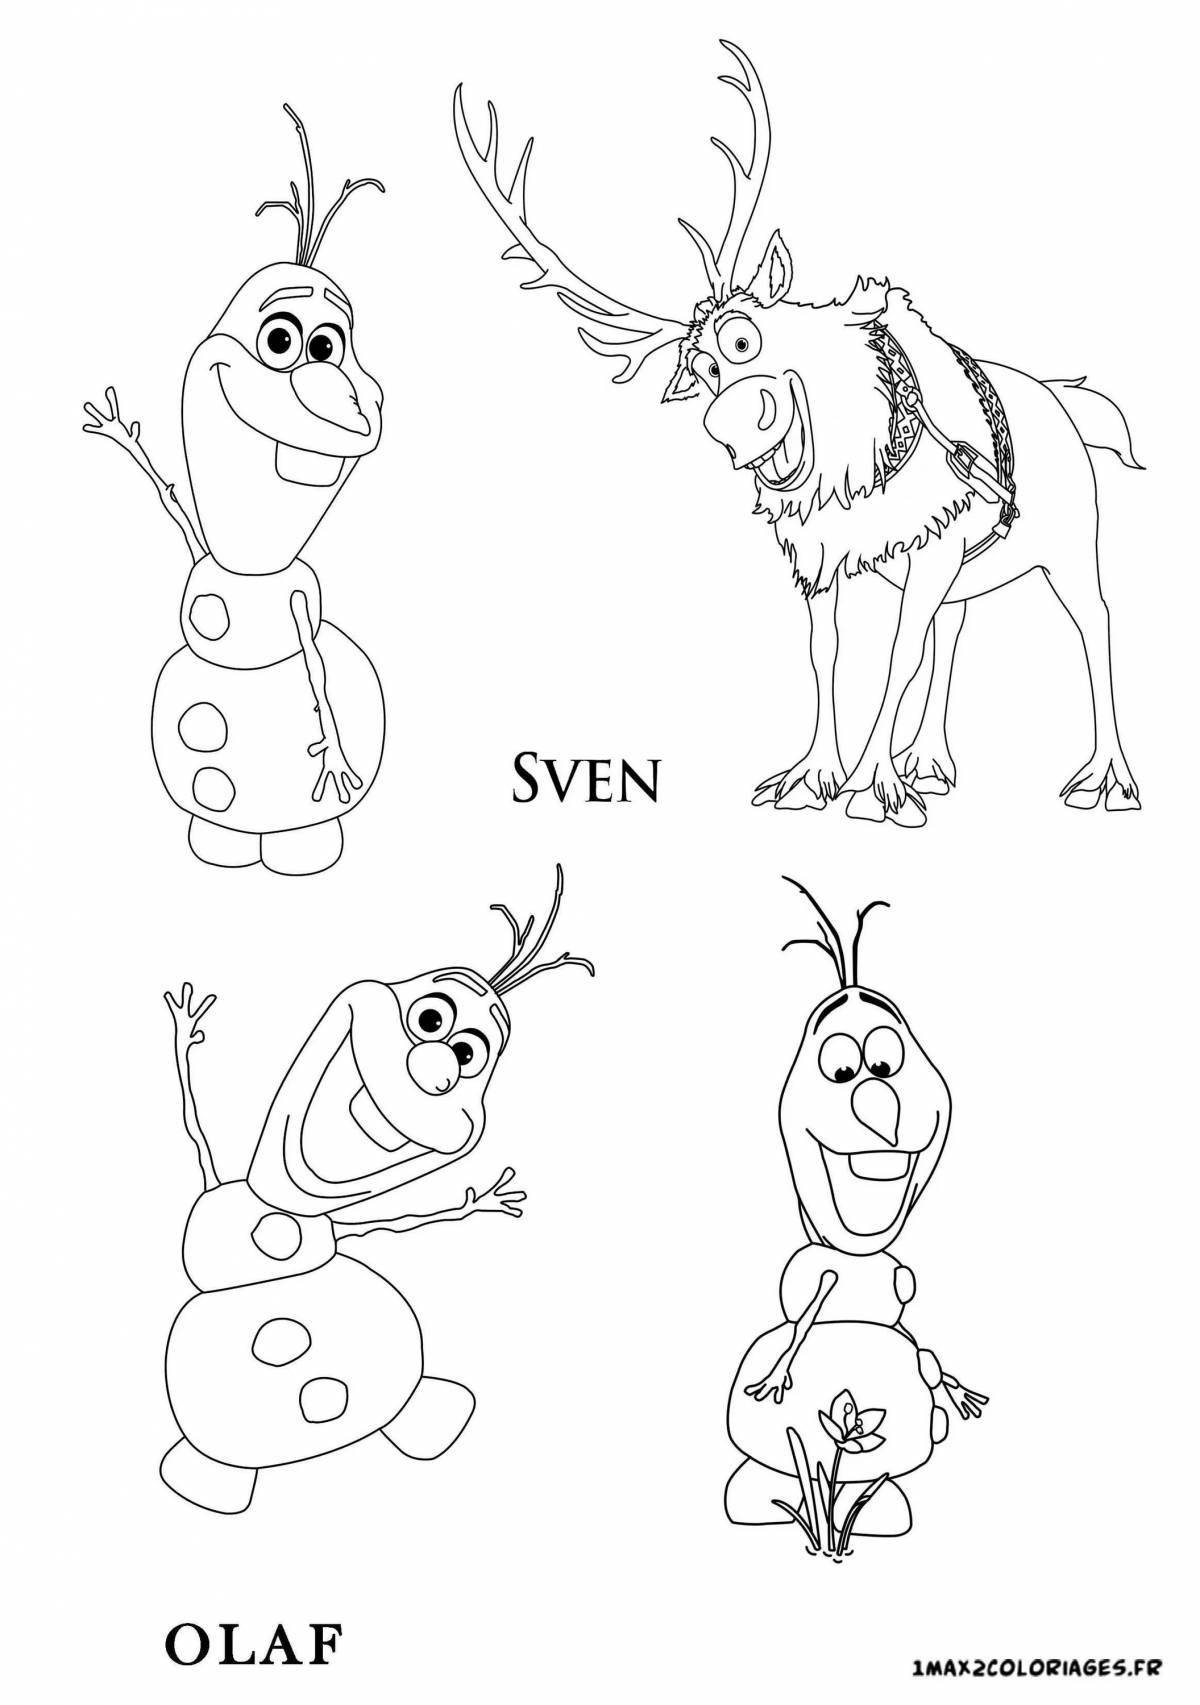 Coloring page nice snowman olaf